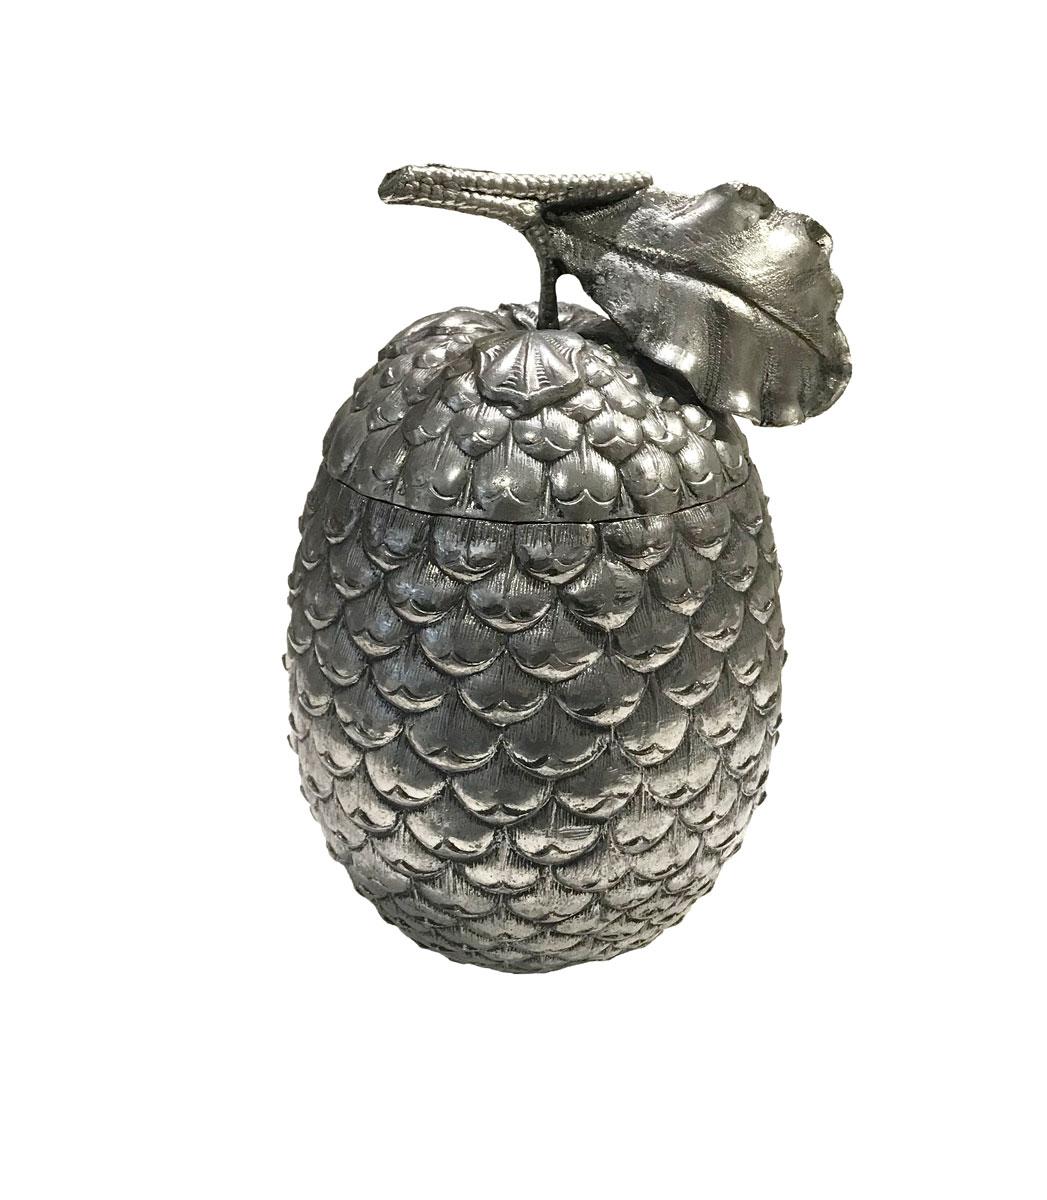 Pinecone ice bucket designed by Mauro Manetti, circa 1970 (productions realized after the 1980s have a white lacquered metallic inner part instead). Outside made of silverplated cast aluminum and a metallic inner part, typical of the production of